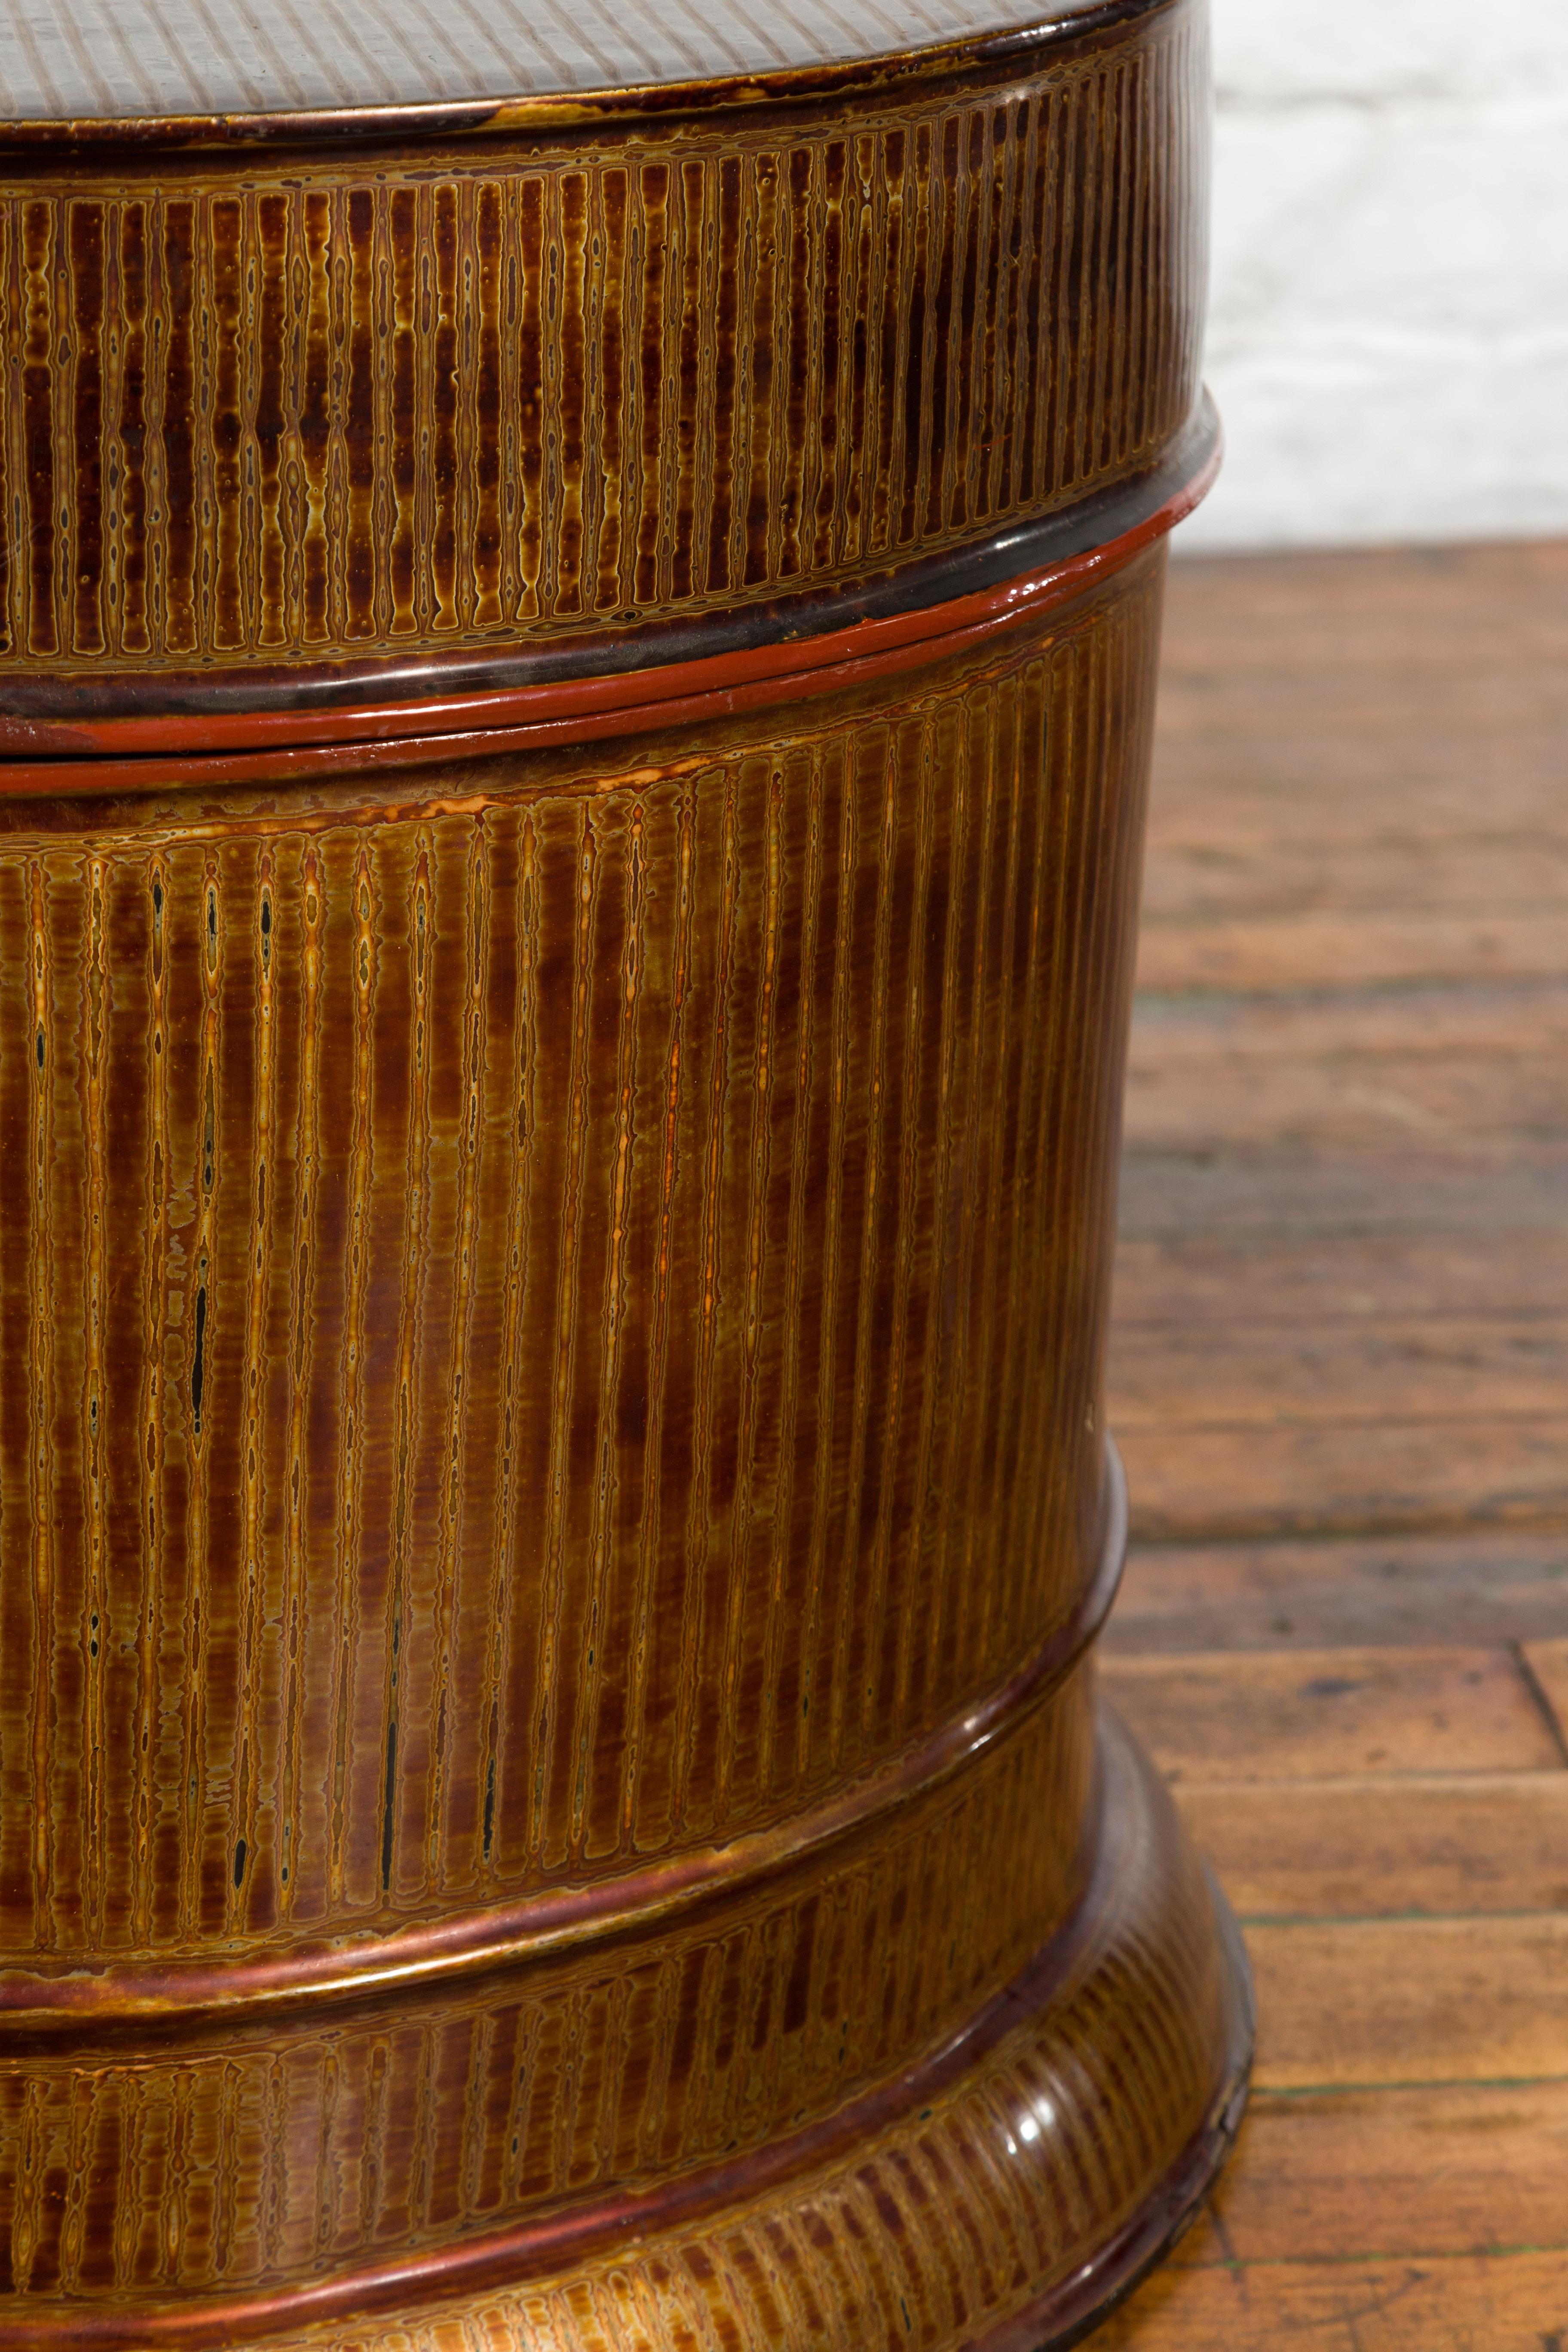 Burmese Vintage Negora Lacquer Circular Storage Bin with Vertical Stripes For Sale 5